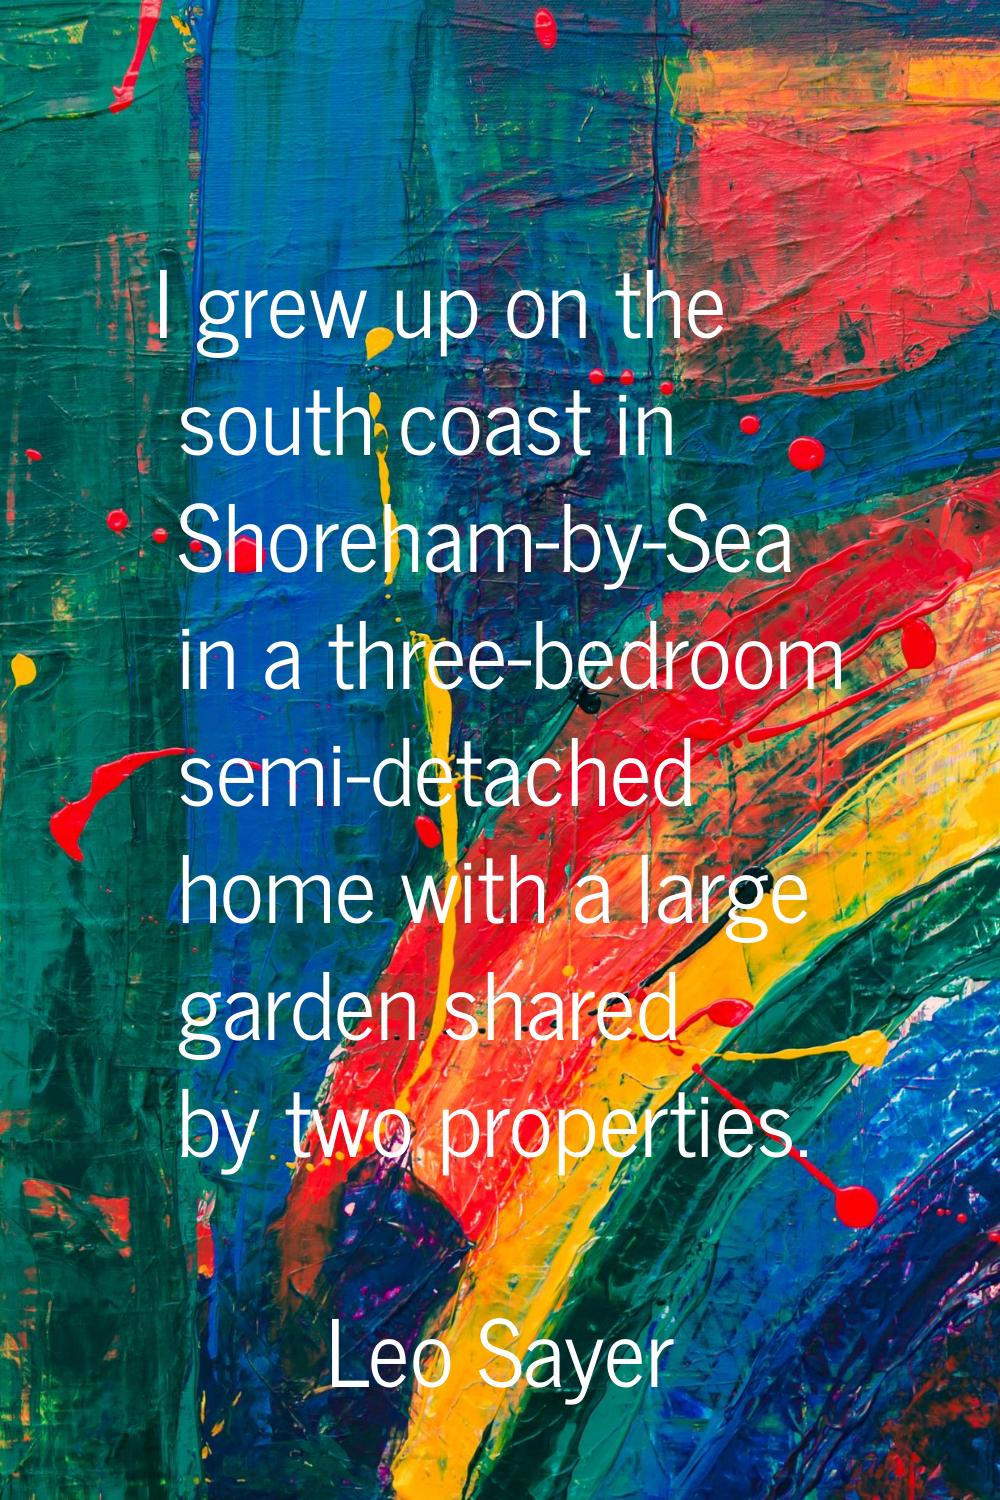 I grew up on the south coast in Shoreham-by-Sea in a three-bedroom semi-detached home with a large 